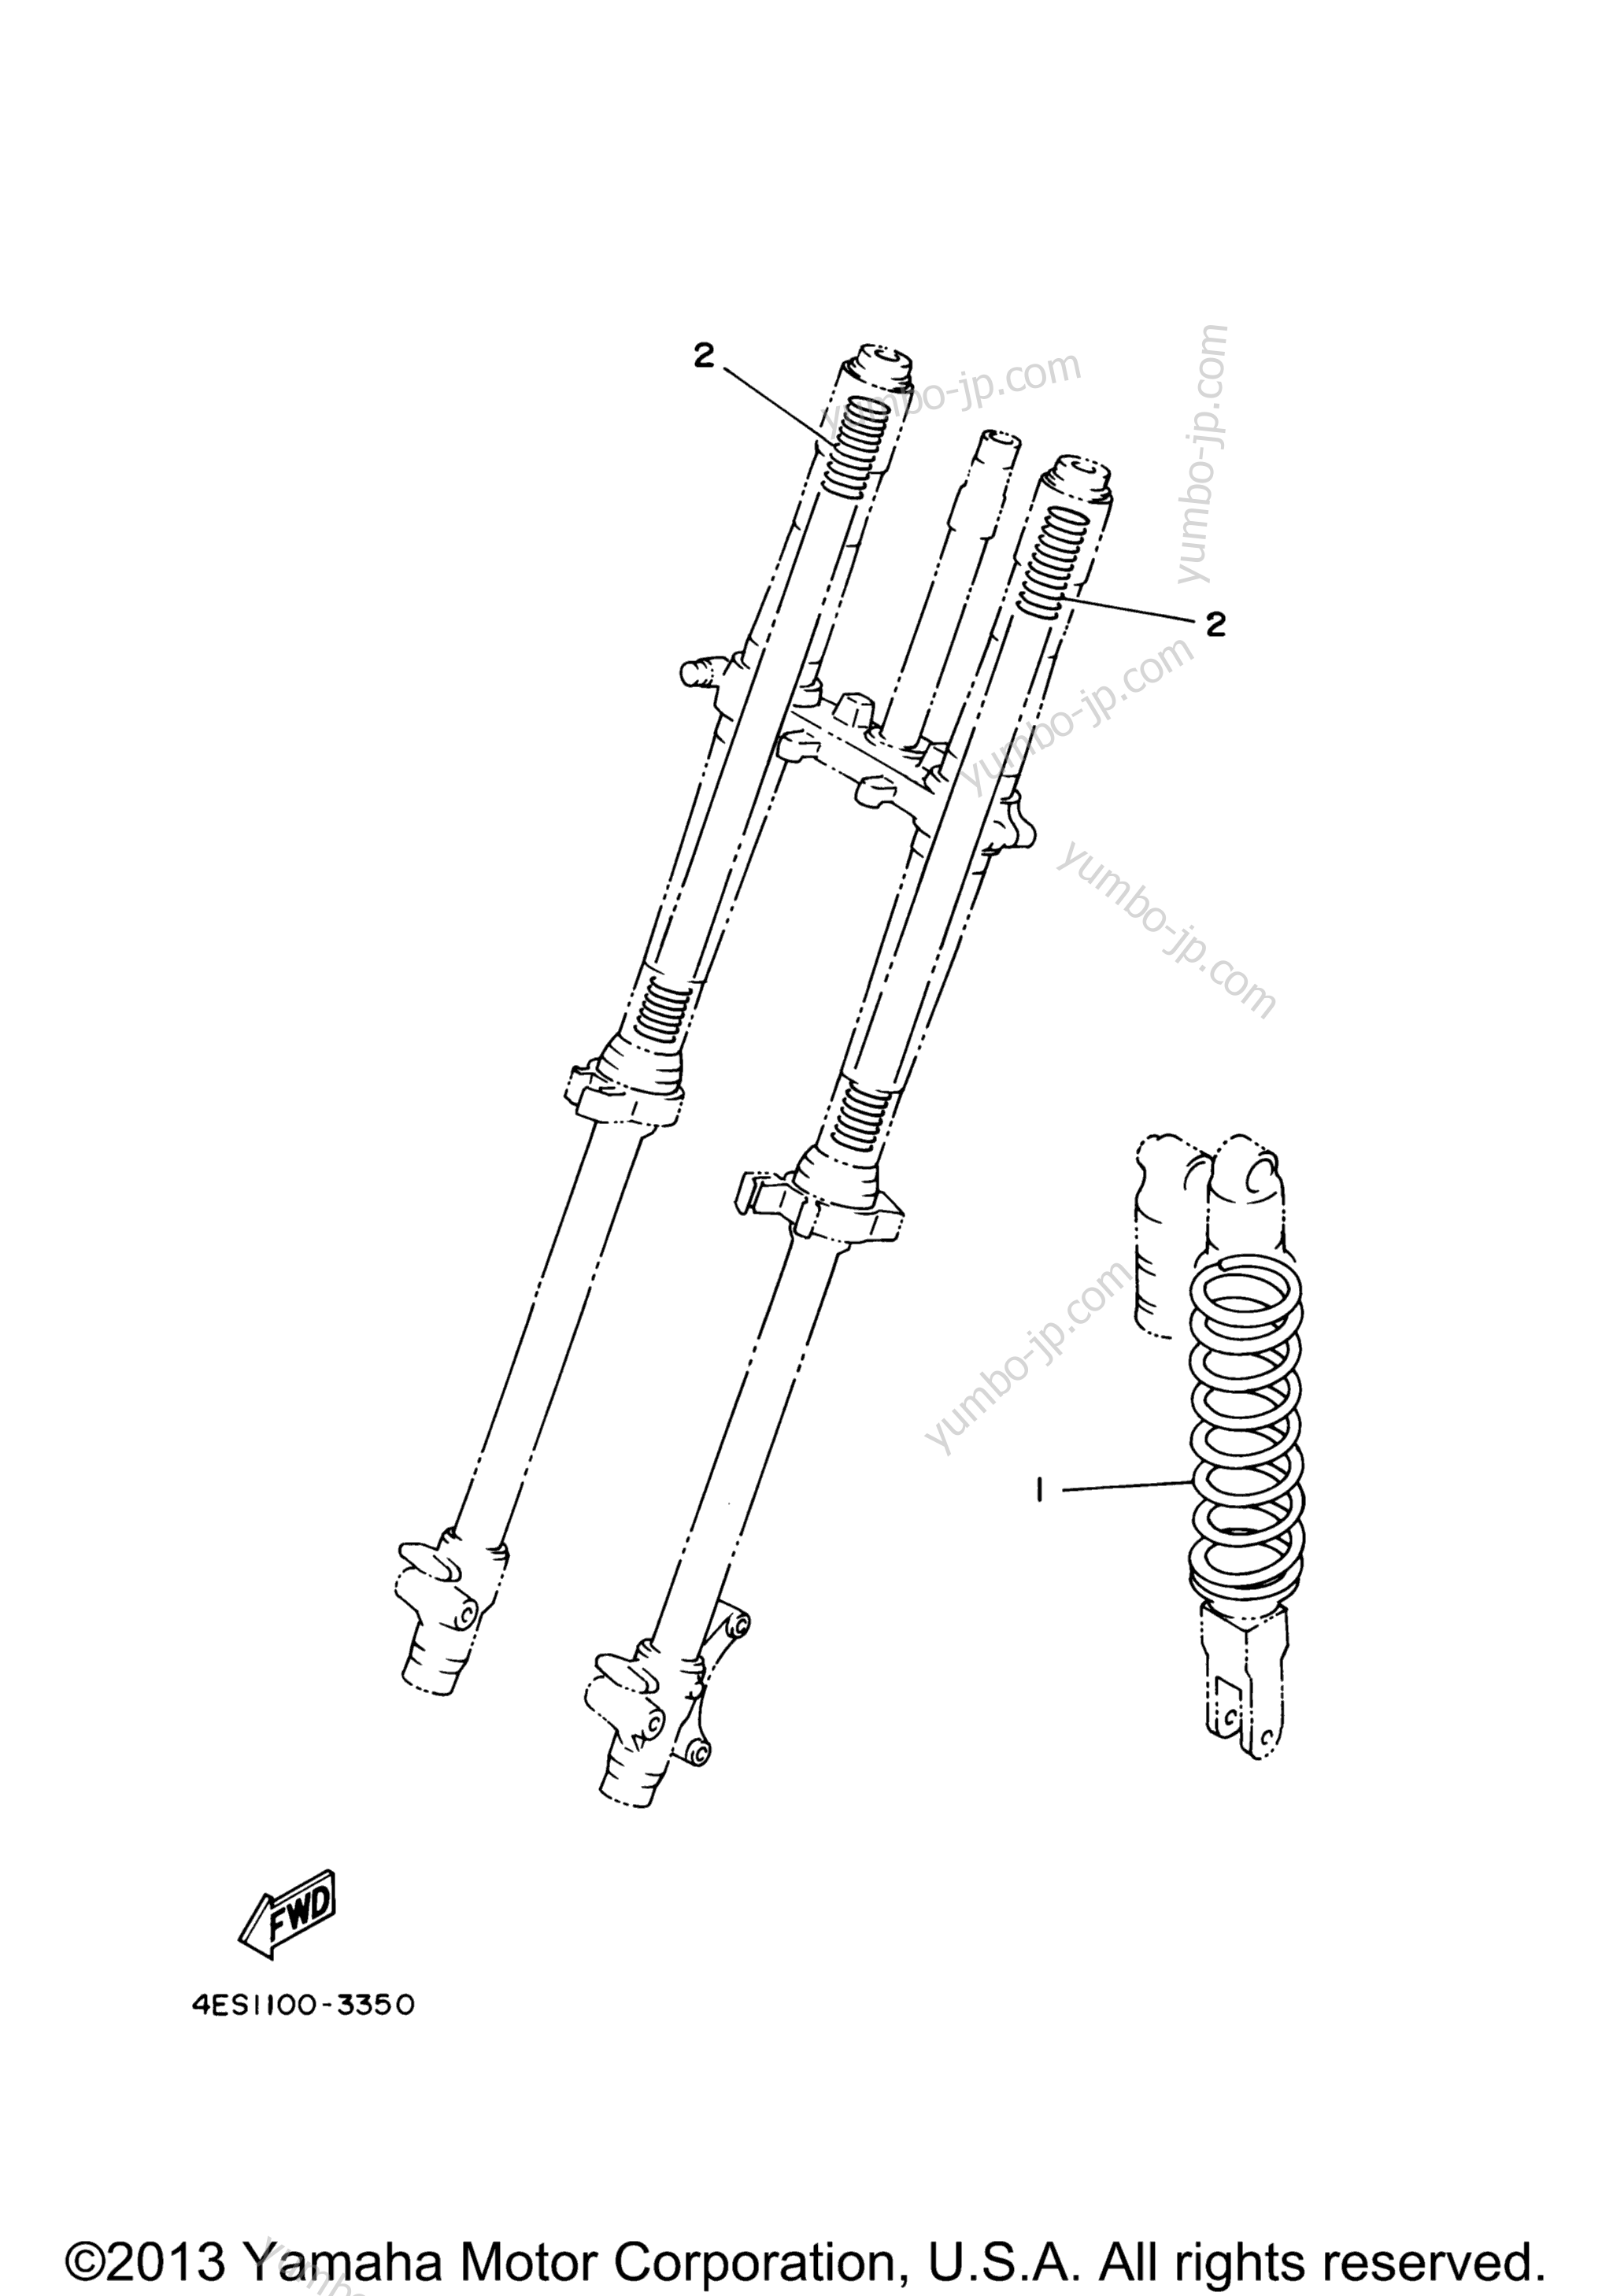 Alternate For Chassis for motorcycles YAMAHA YZ85 (YZ85E) 2014 year